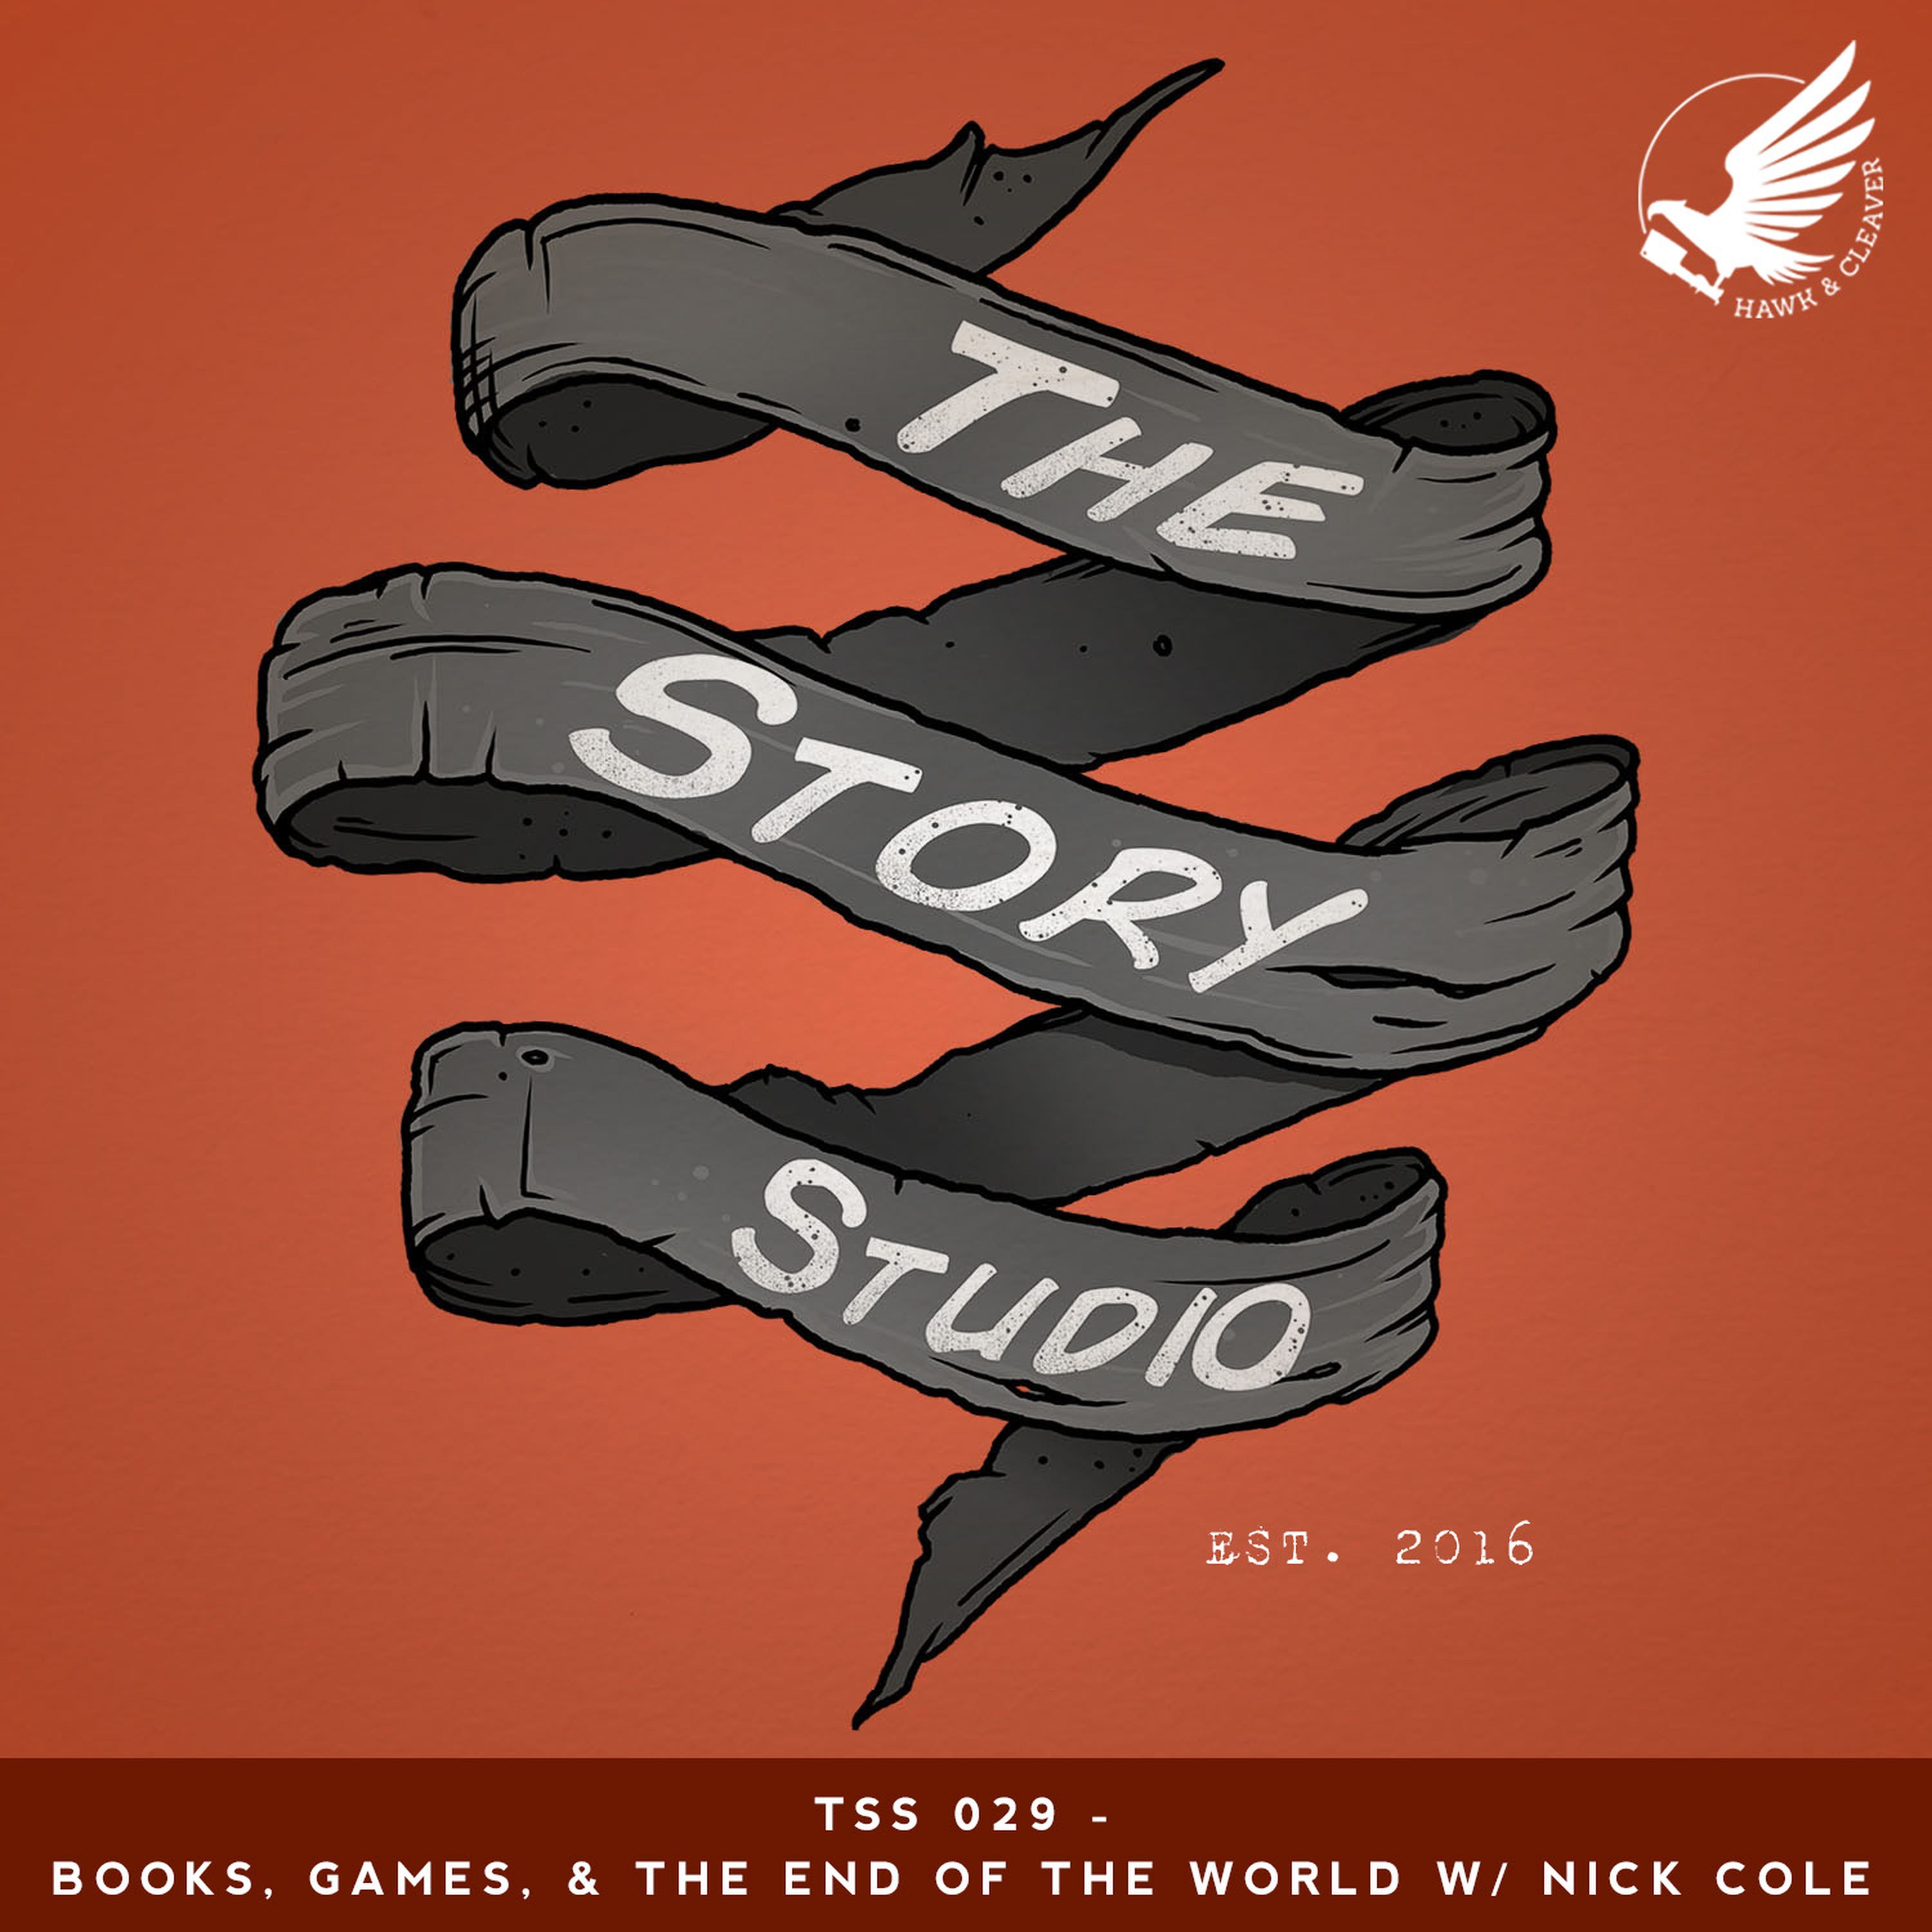 TSS 029 - Books, Games, & The End of the World W/ Nick Cole